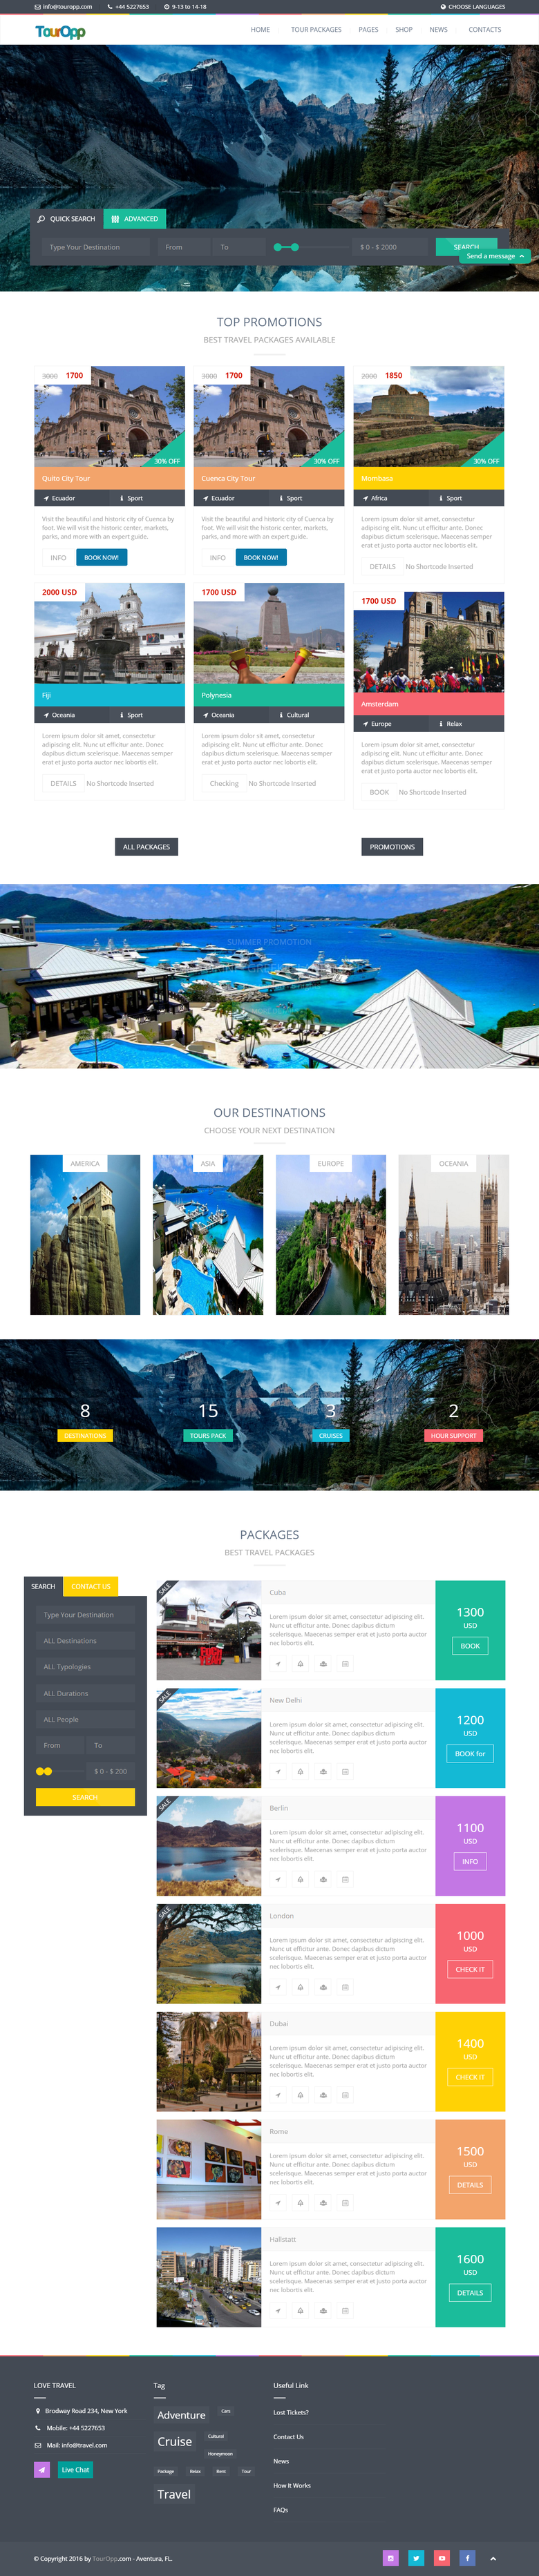 Build  a Travel packages compare website